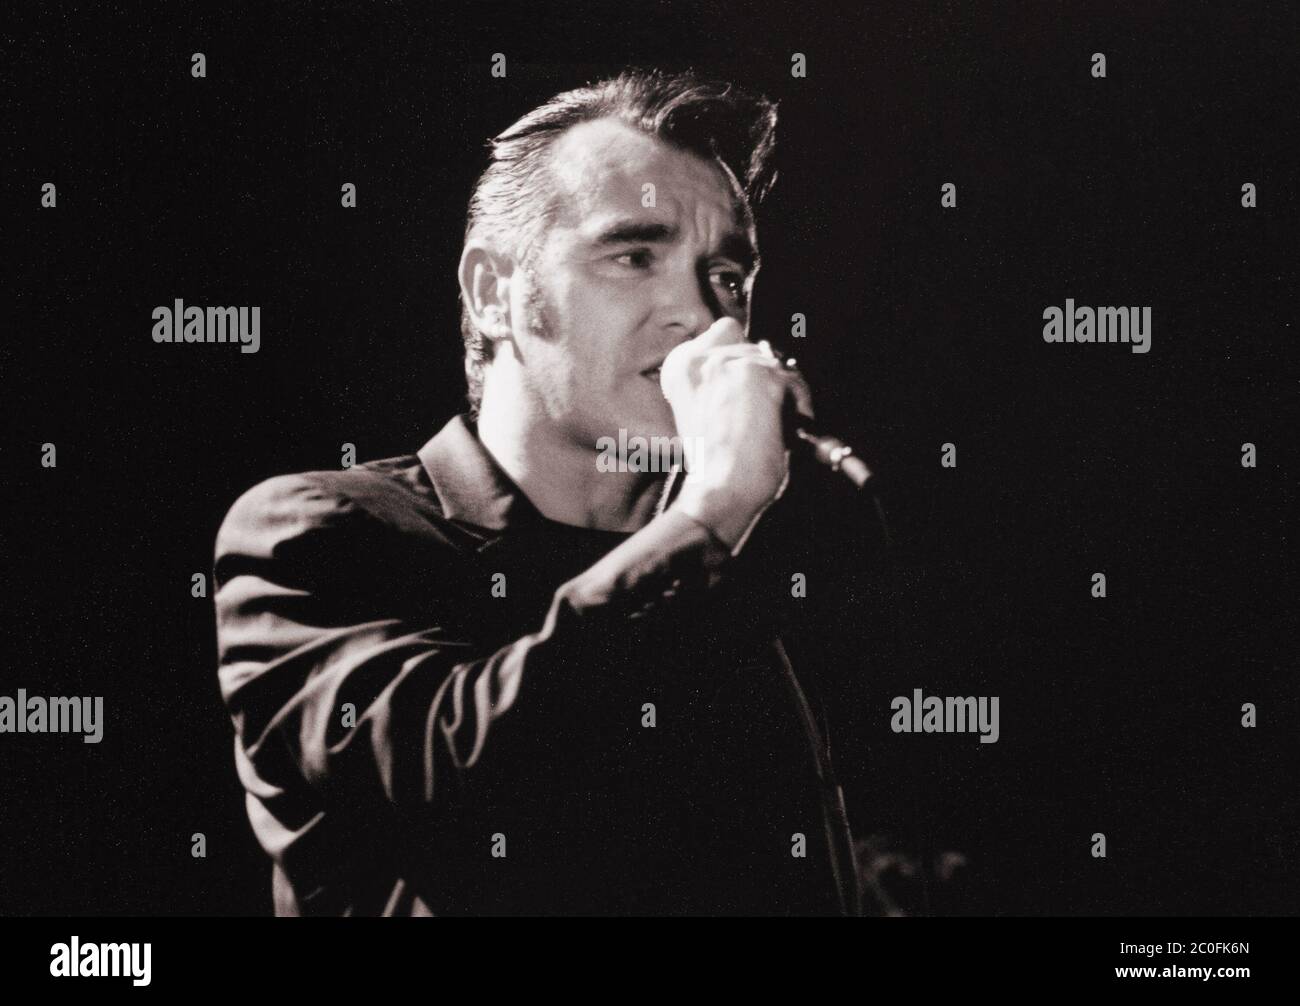 03 June 2020 - Morrissey showed his solidarity for Black Lives Matter on Twitter with the hashtag #TheShowMustBePaused to support the music community's Blackout Tuesday. While some of Morrissey's fans praised his showing of solidarity, others criticized the tweet because of his often controversial political views in the past.  File Photo: Morrissey performs on stage in 2000 at Hamilton Place Theatre, Hamilton, Ontario, Canada. (Editors Note: This image has been converted to black and white) (Credit Image: © Brent Perniac/AdMedia via ZUMA Wire) Stock Photo